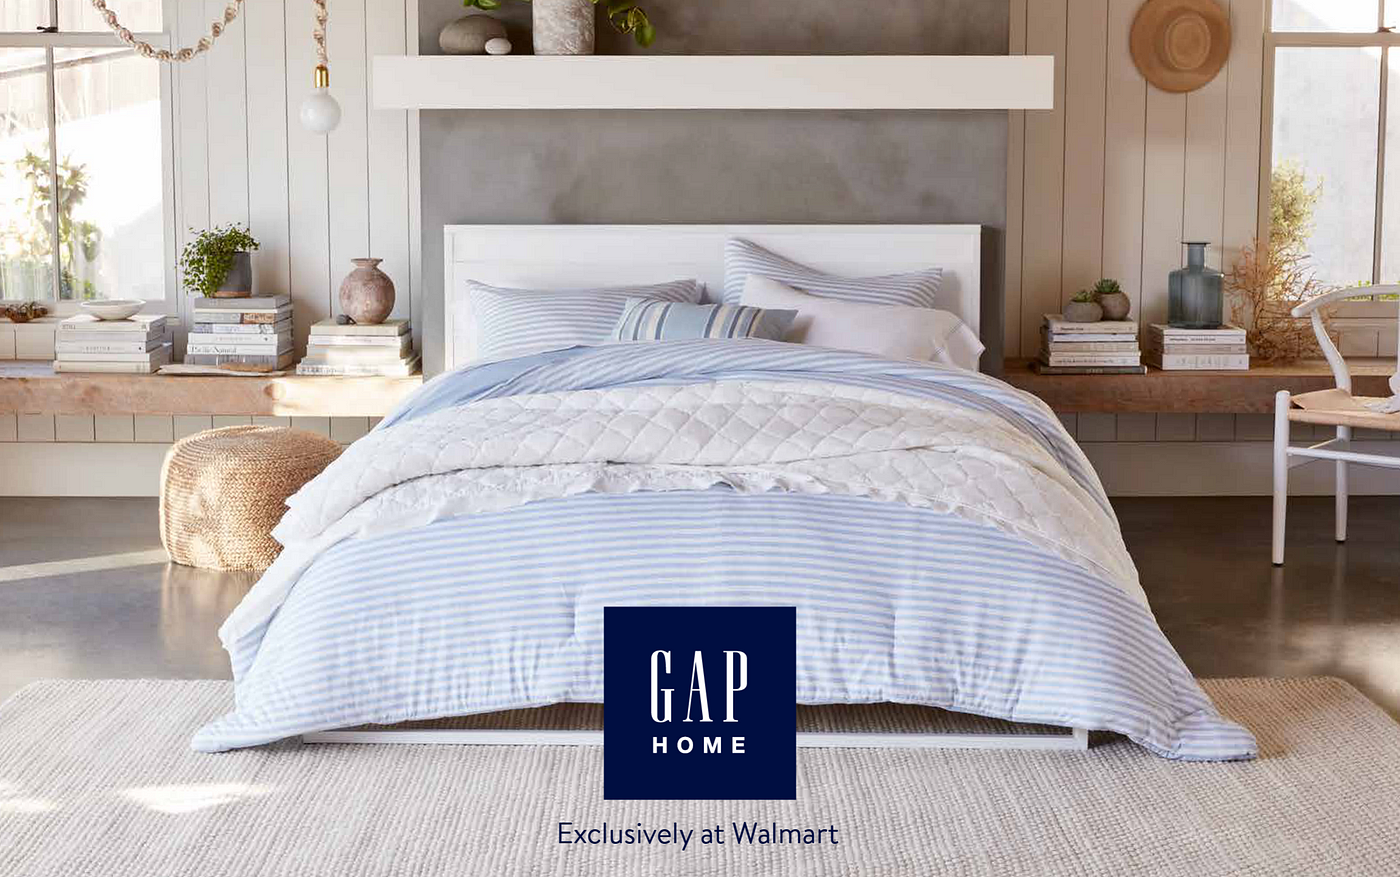 Gap's Latest Attempt to Stay Relevant: Selling Home Goods at Walmart | by  Michael Beausoleil | Marker